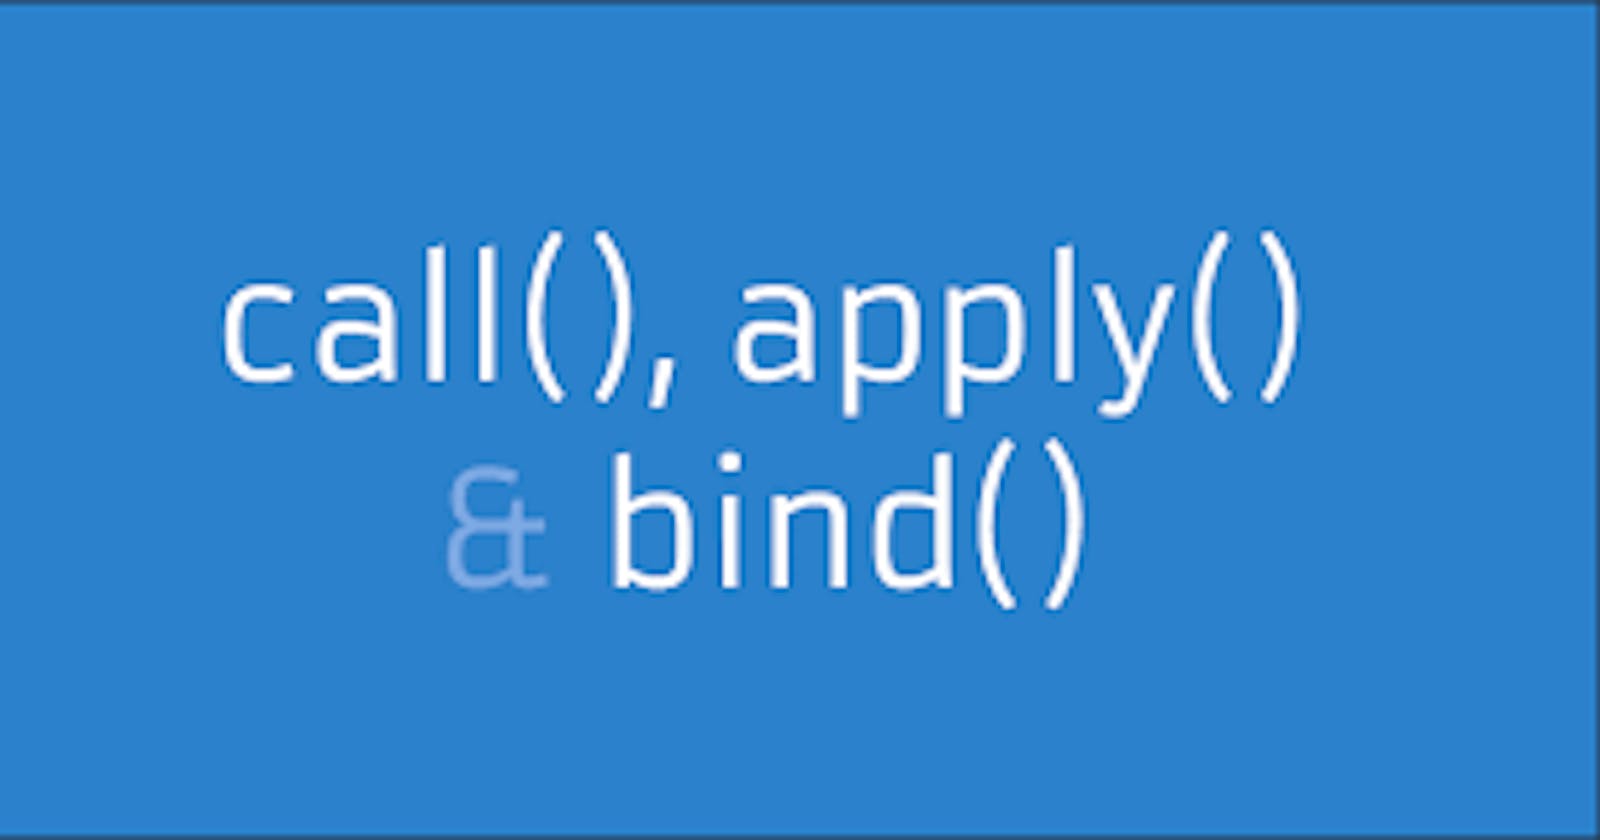 Call, Apply and Bind in JavaScript